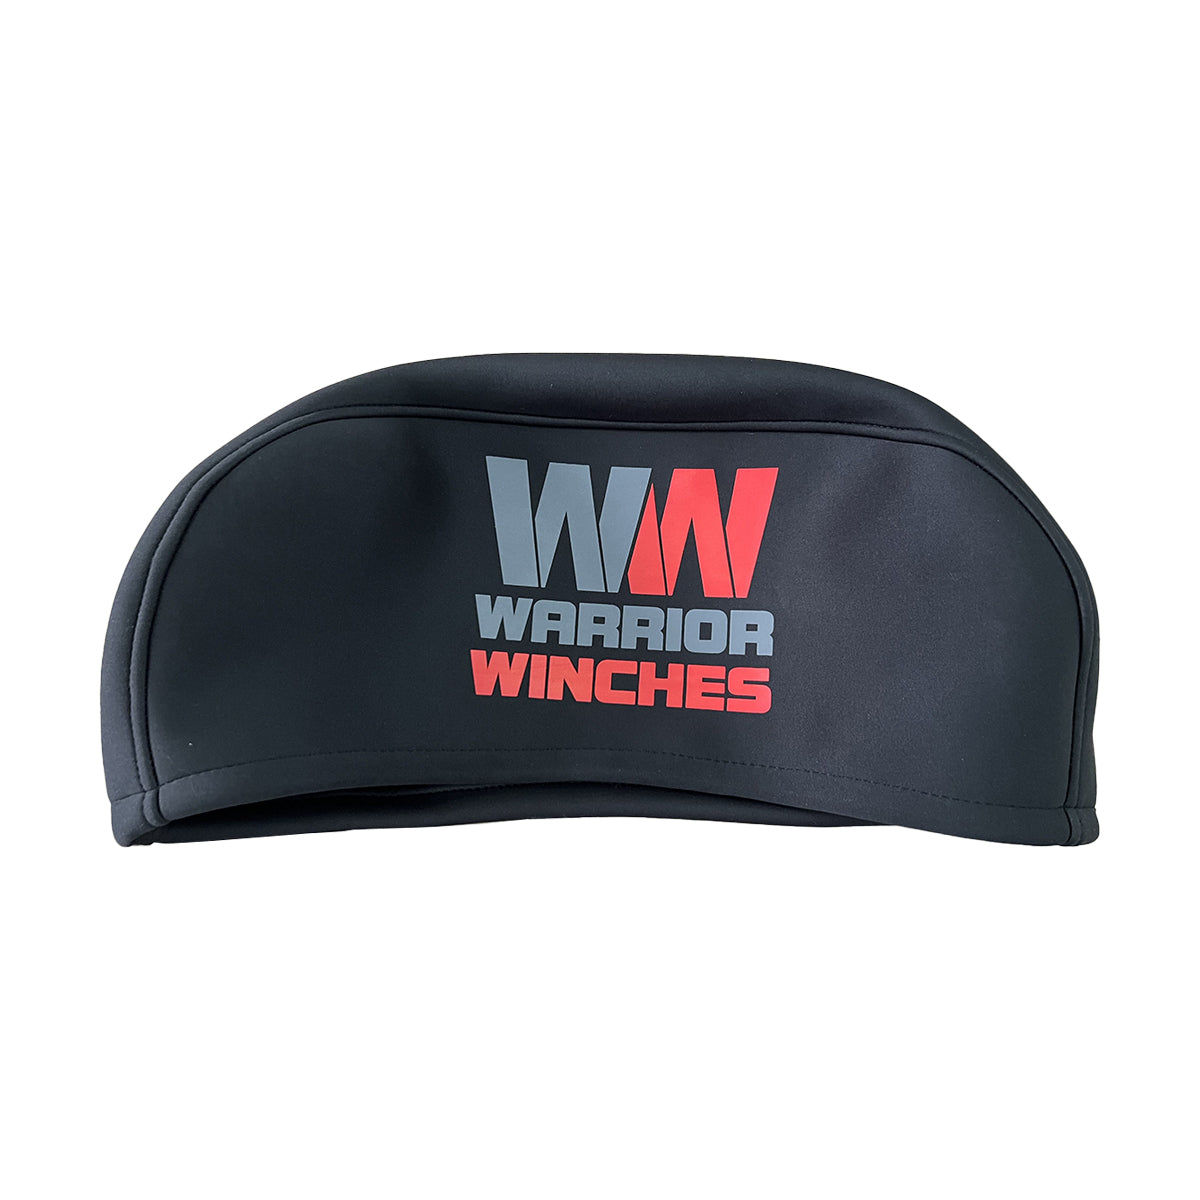 Neoprene Winch Covers for Winches 17,500 to 22,000lb